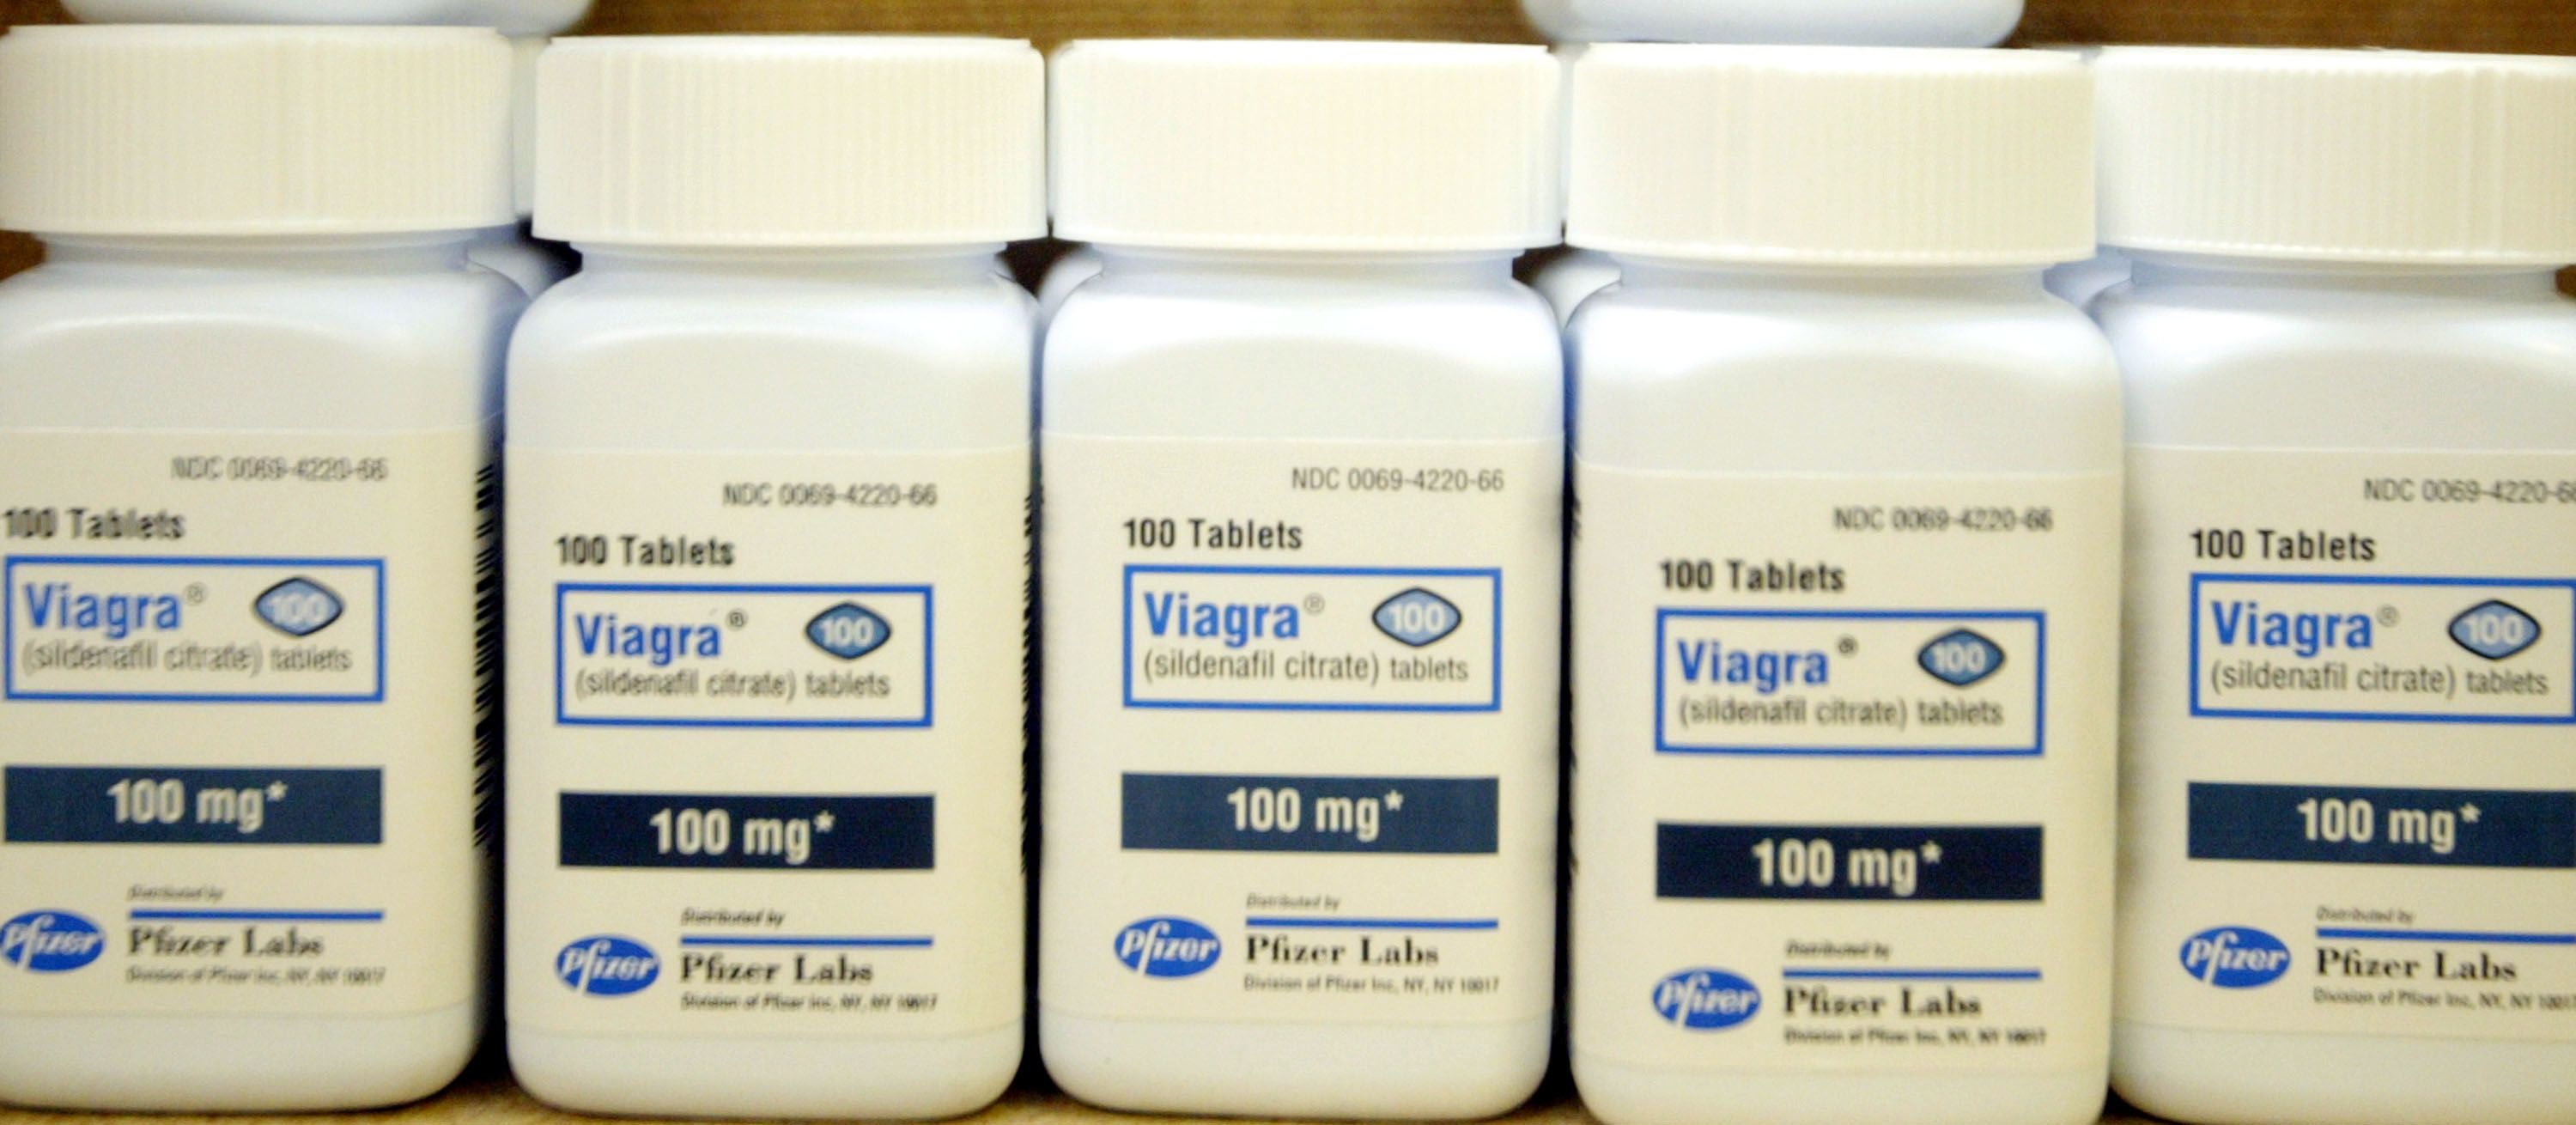 Court rules insurers don't have to pay for Viagra